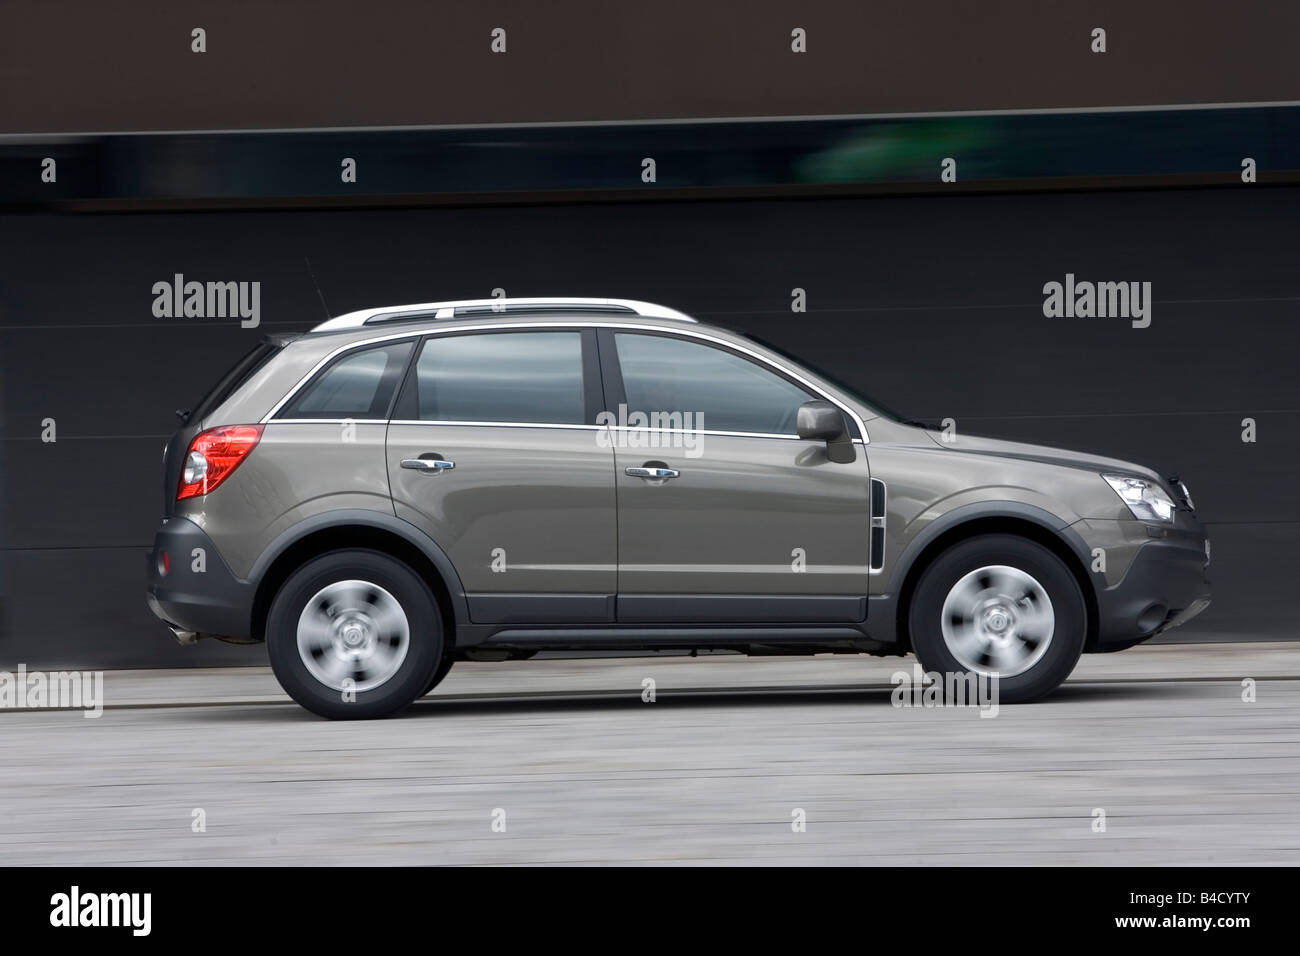 Opel Antara 2.0 CDTI Cosmo, model year 2006-, silver, driving, side view, City Stock Photo